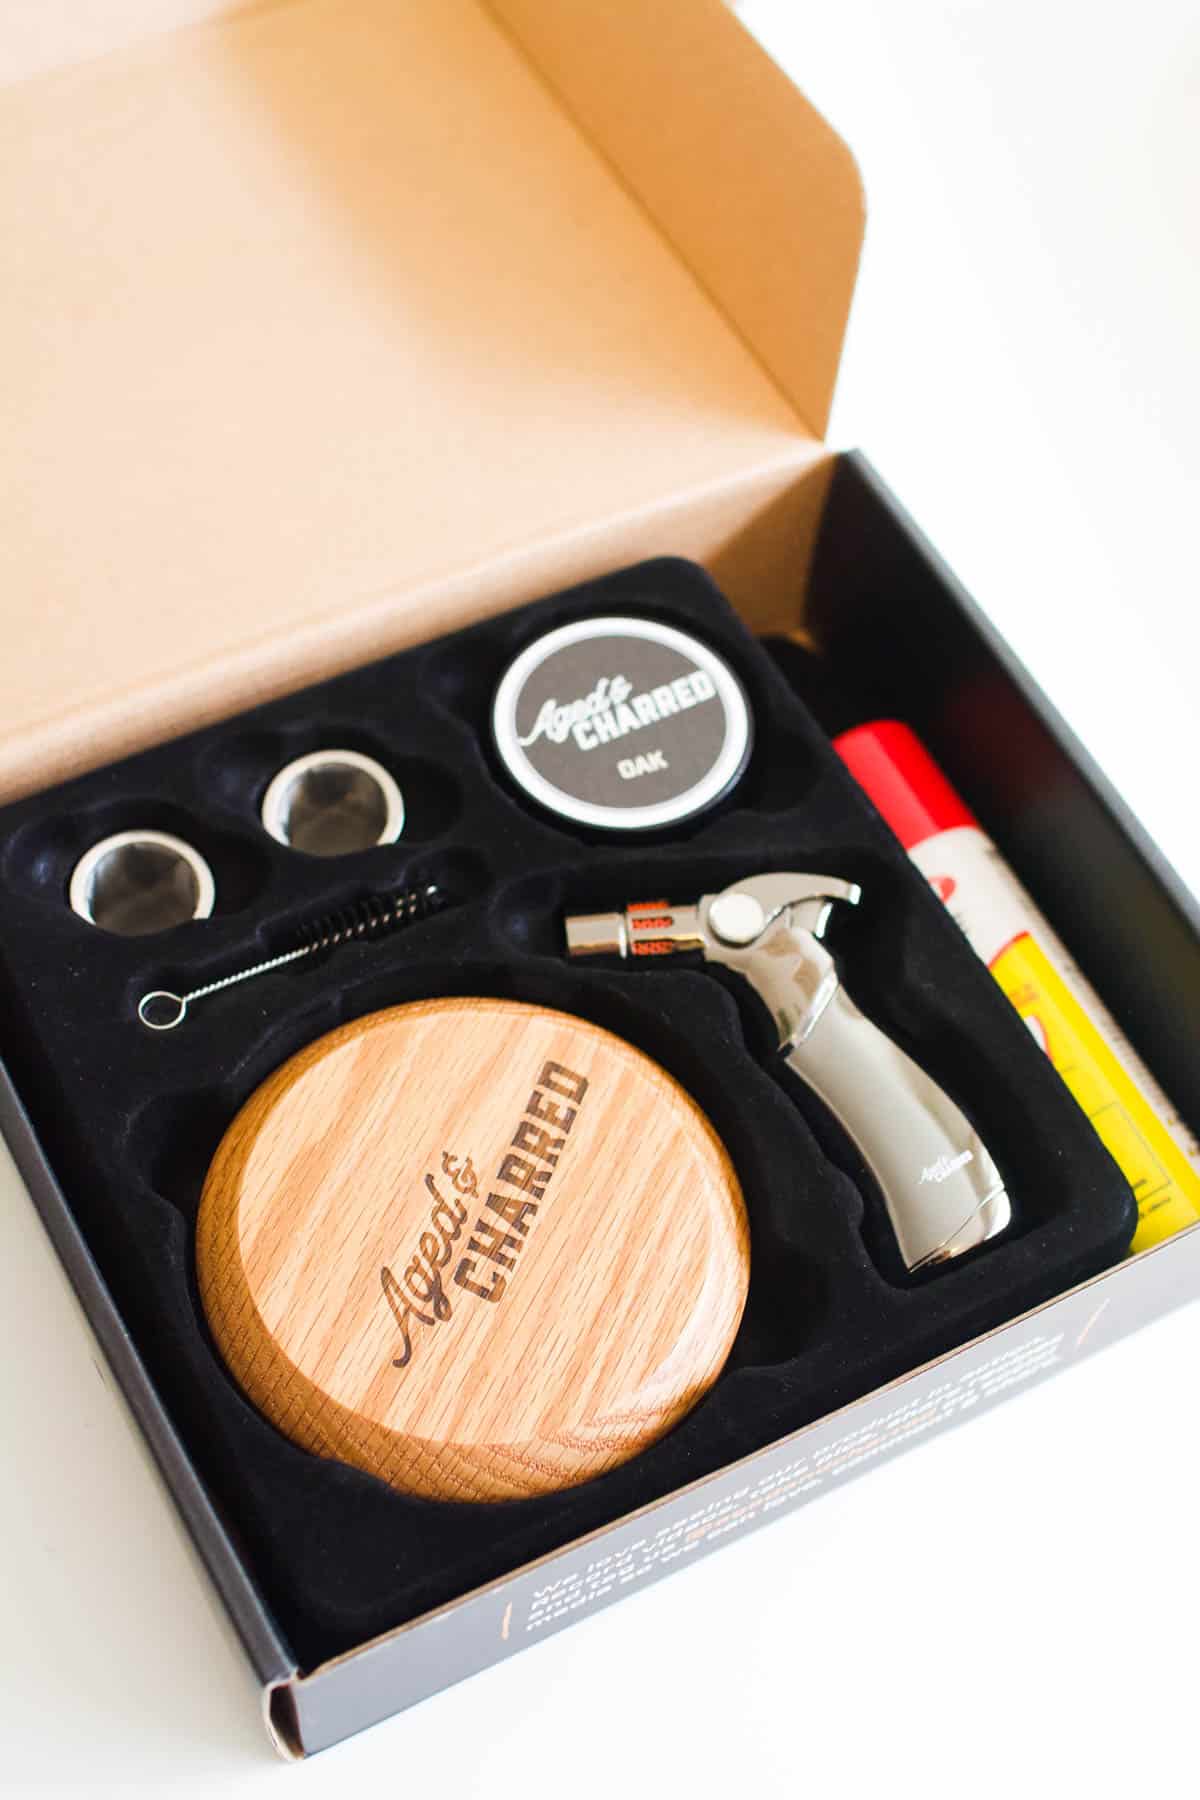 The inside of the Aged and Charred cocktail smoker kit box holding butane, a torch, a cocktail smoker, and wood chips.